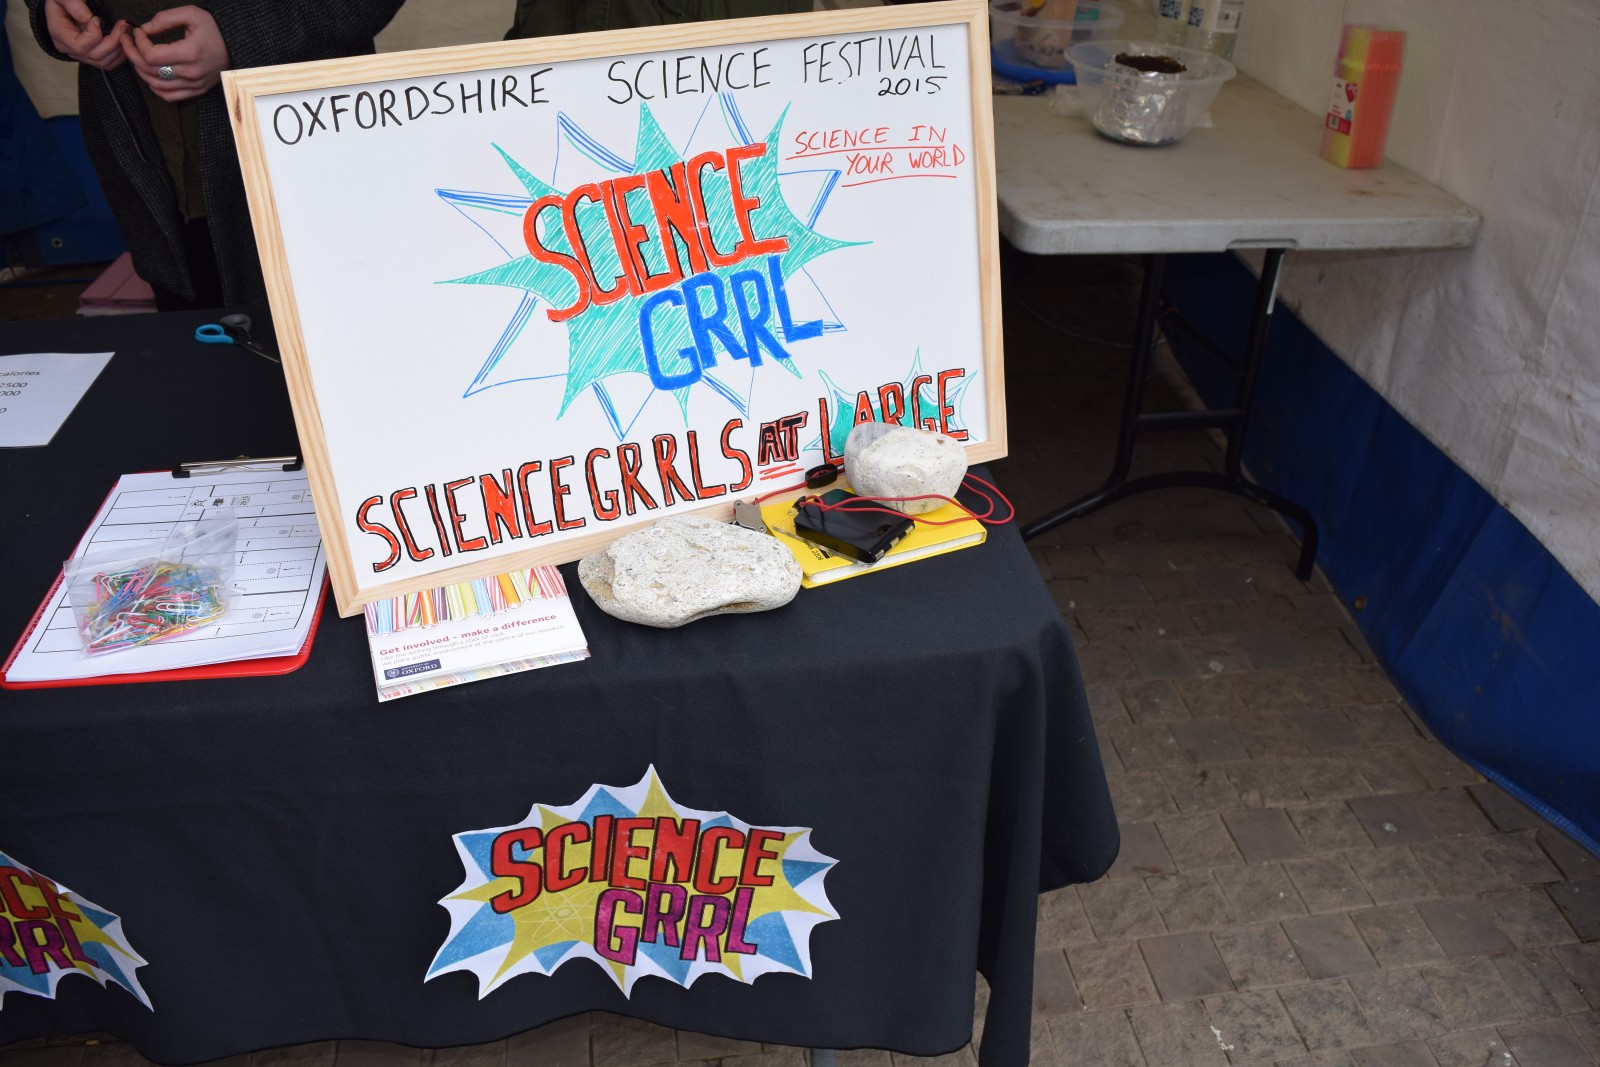 Why not join societies, local geology or science groups, and organisations that promote STEM subjects? Credit: Natasha Dowey at the Oxfordshire Science Festival.